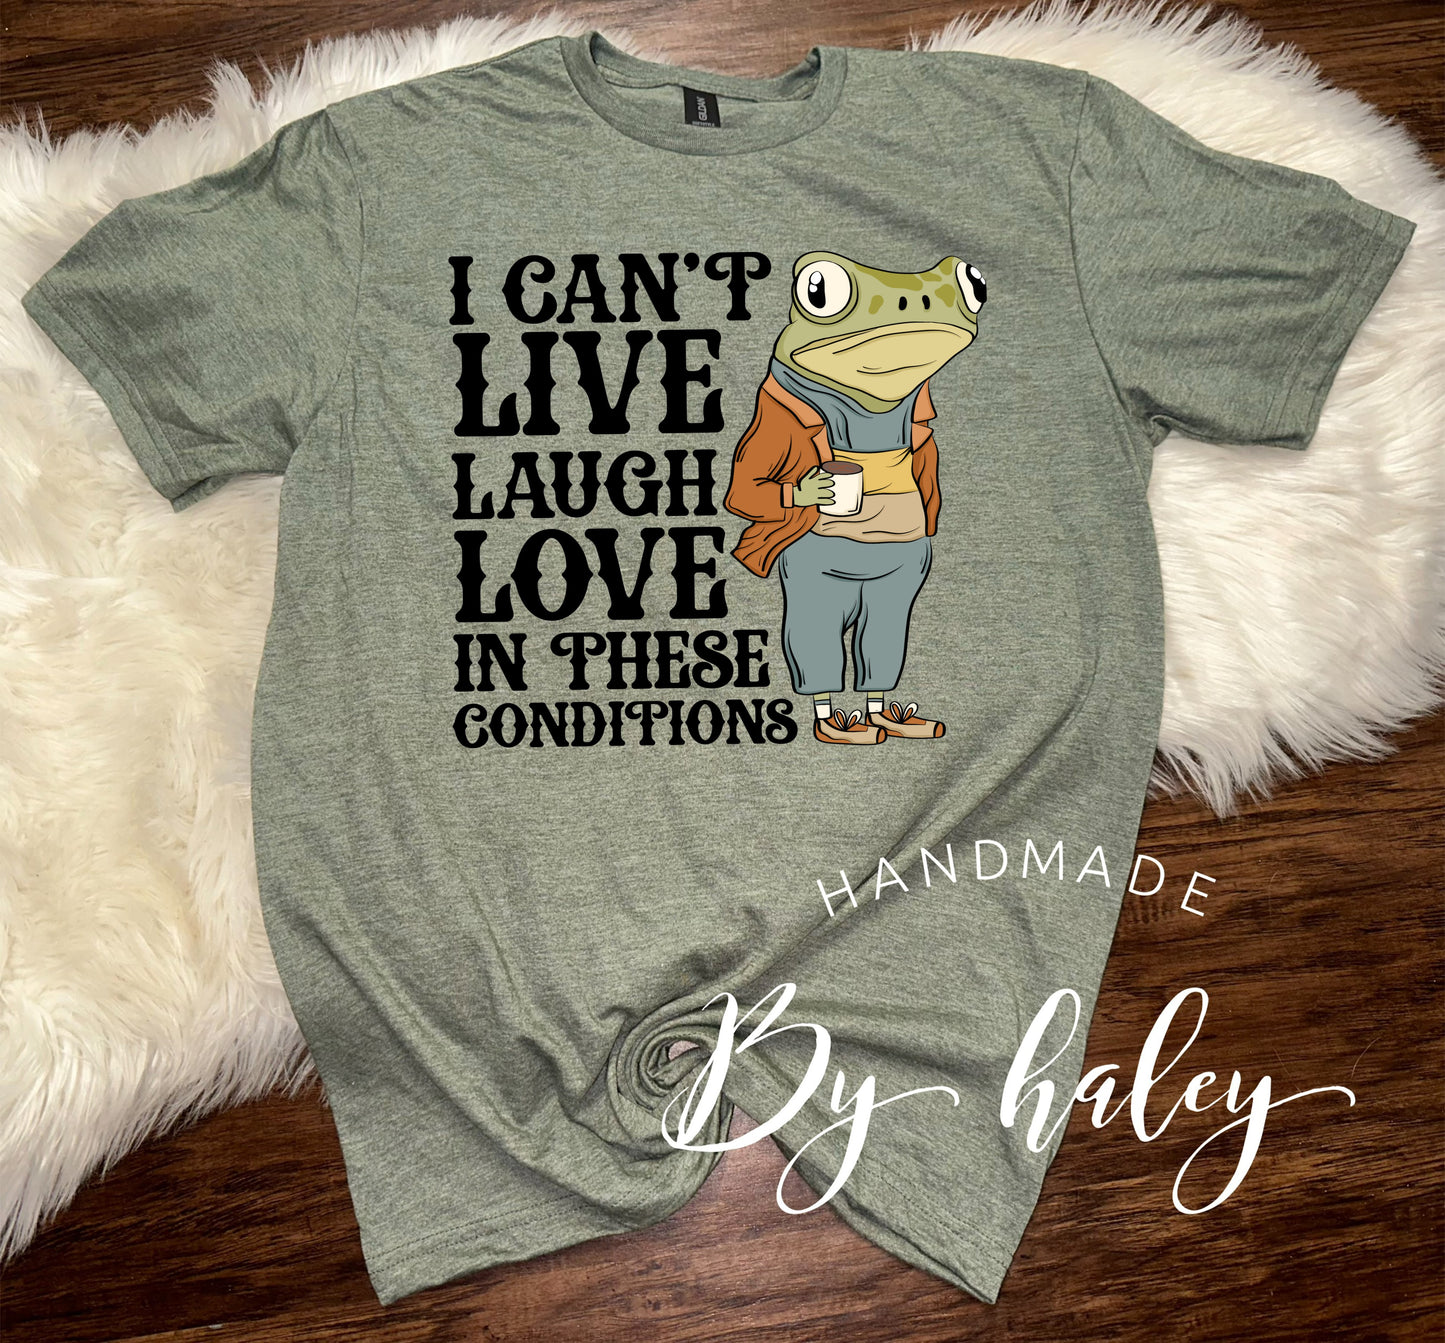 I Can't Live Laugh Love T-Shirt